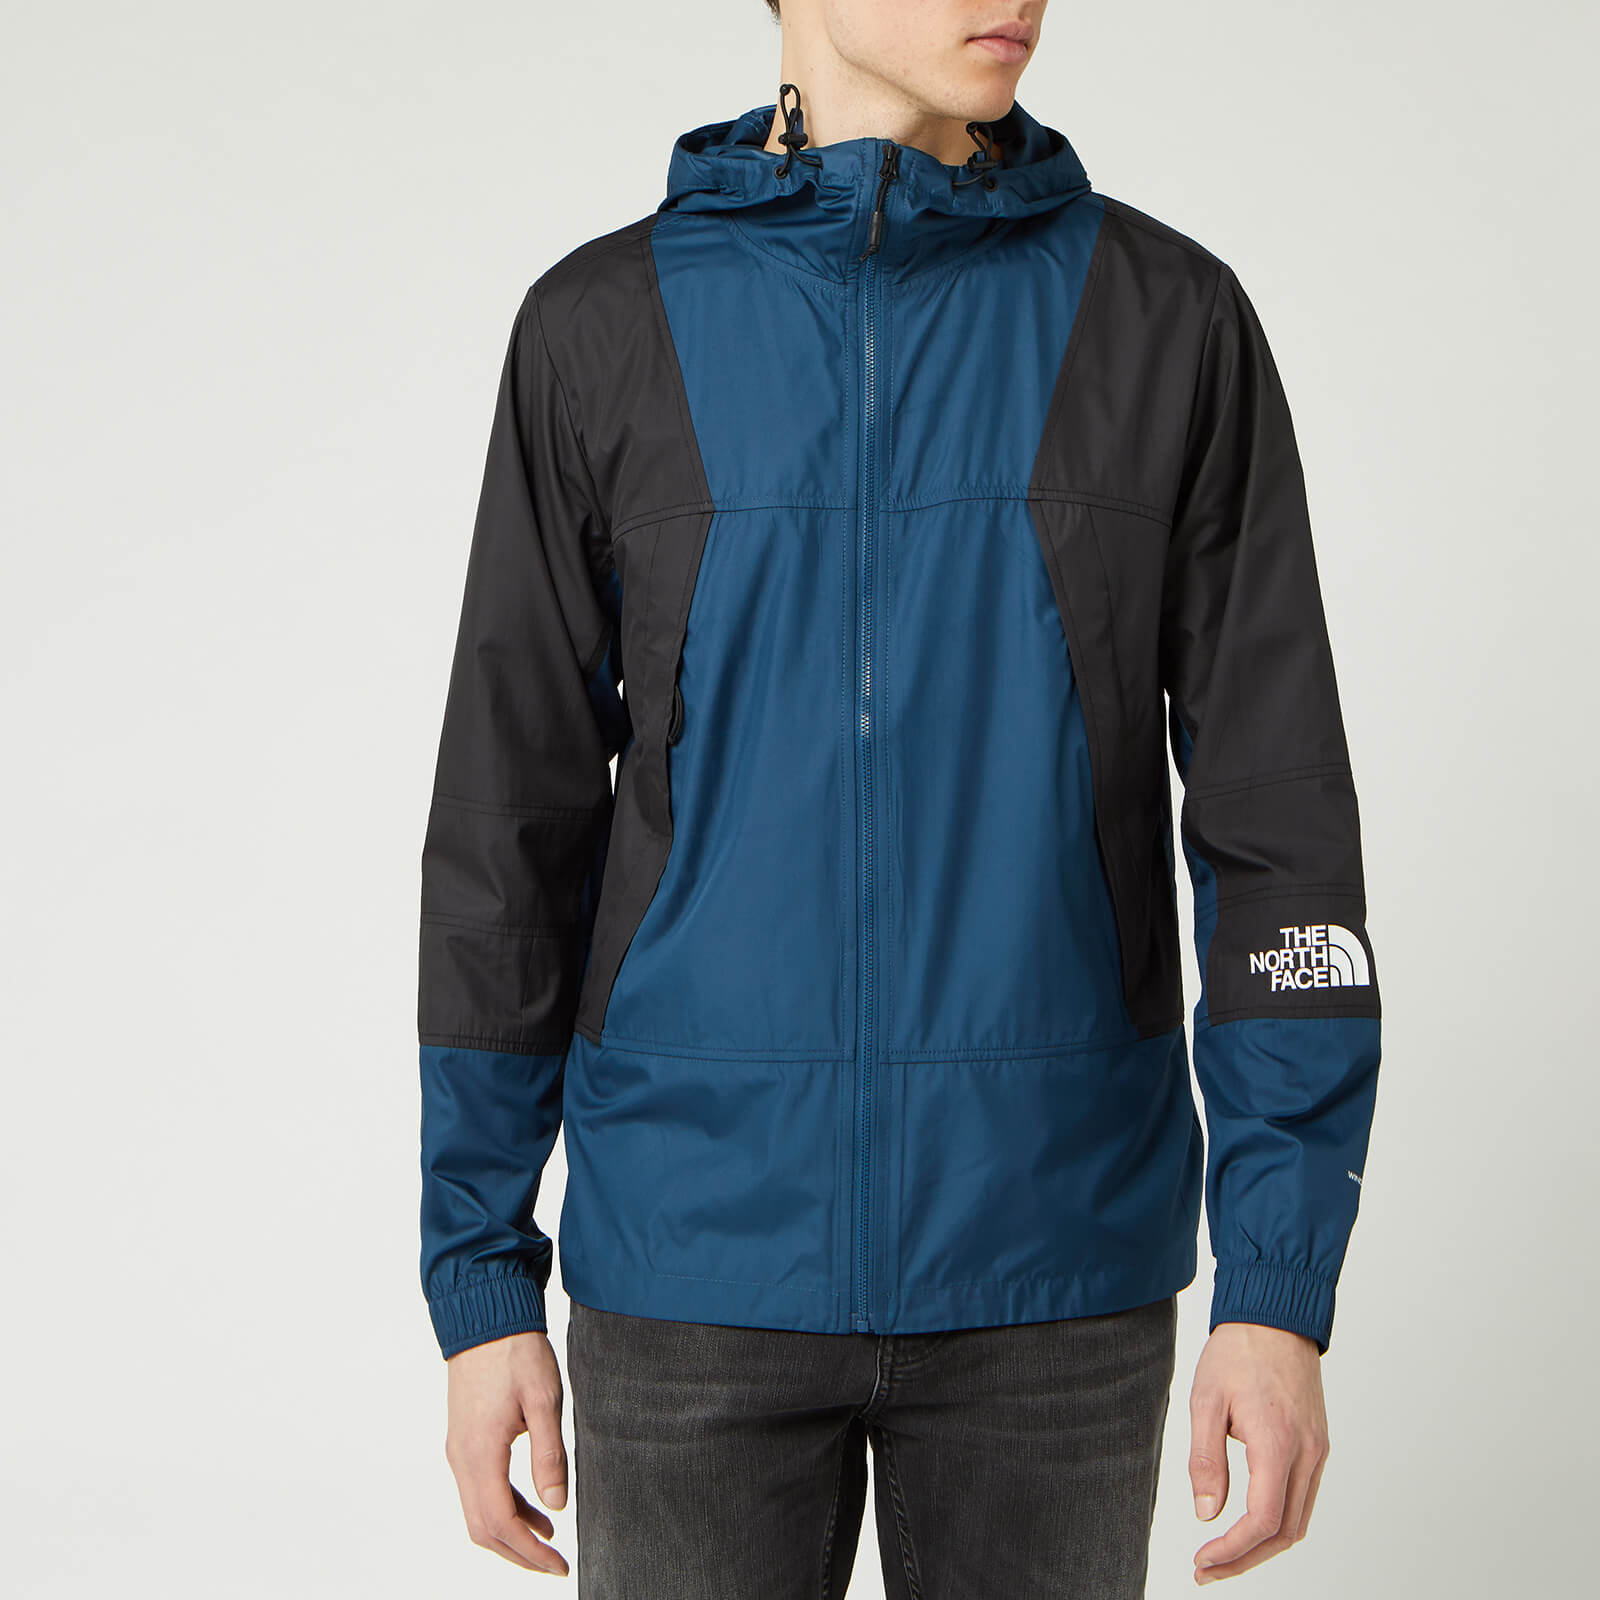 north face windshell